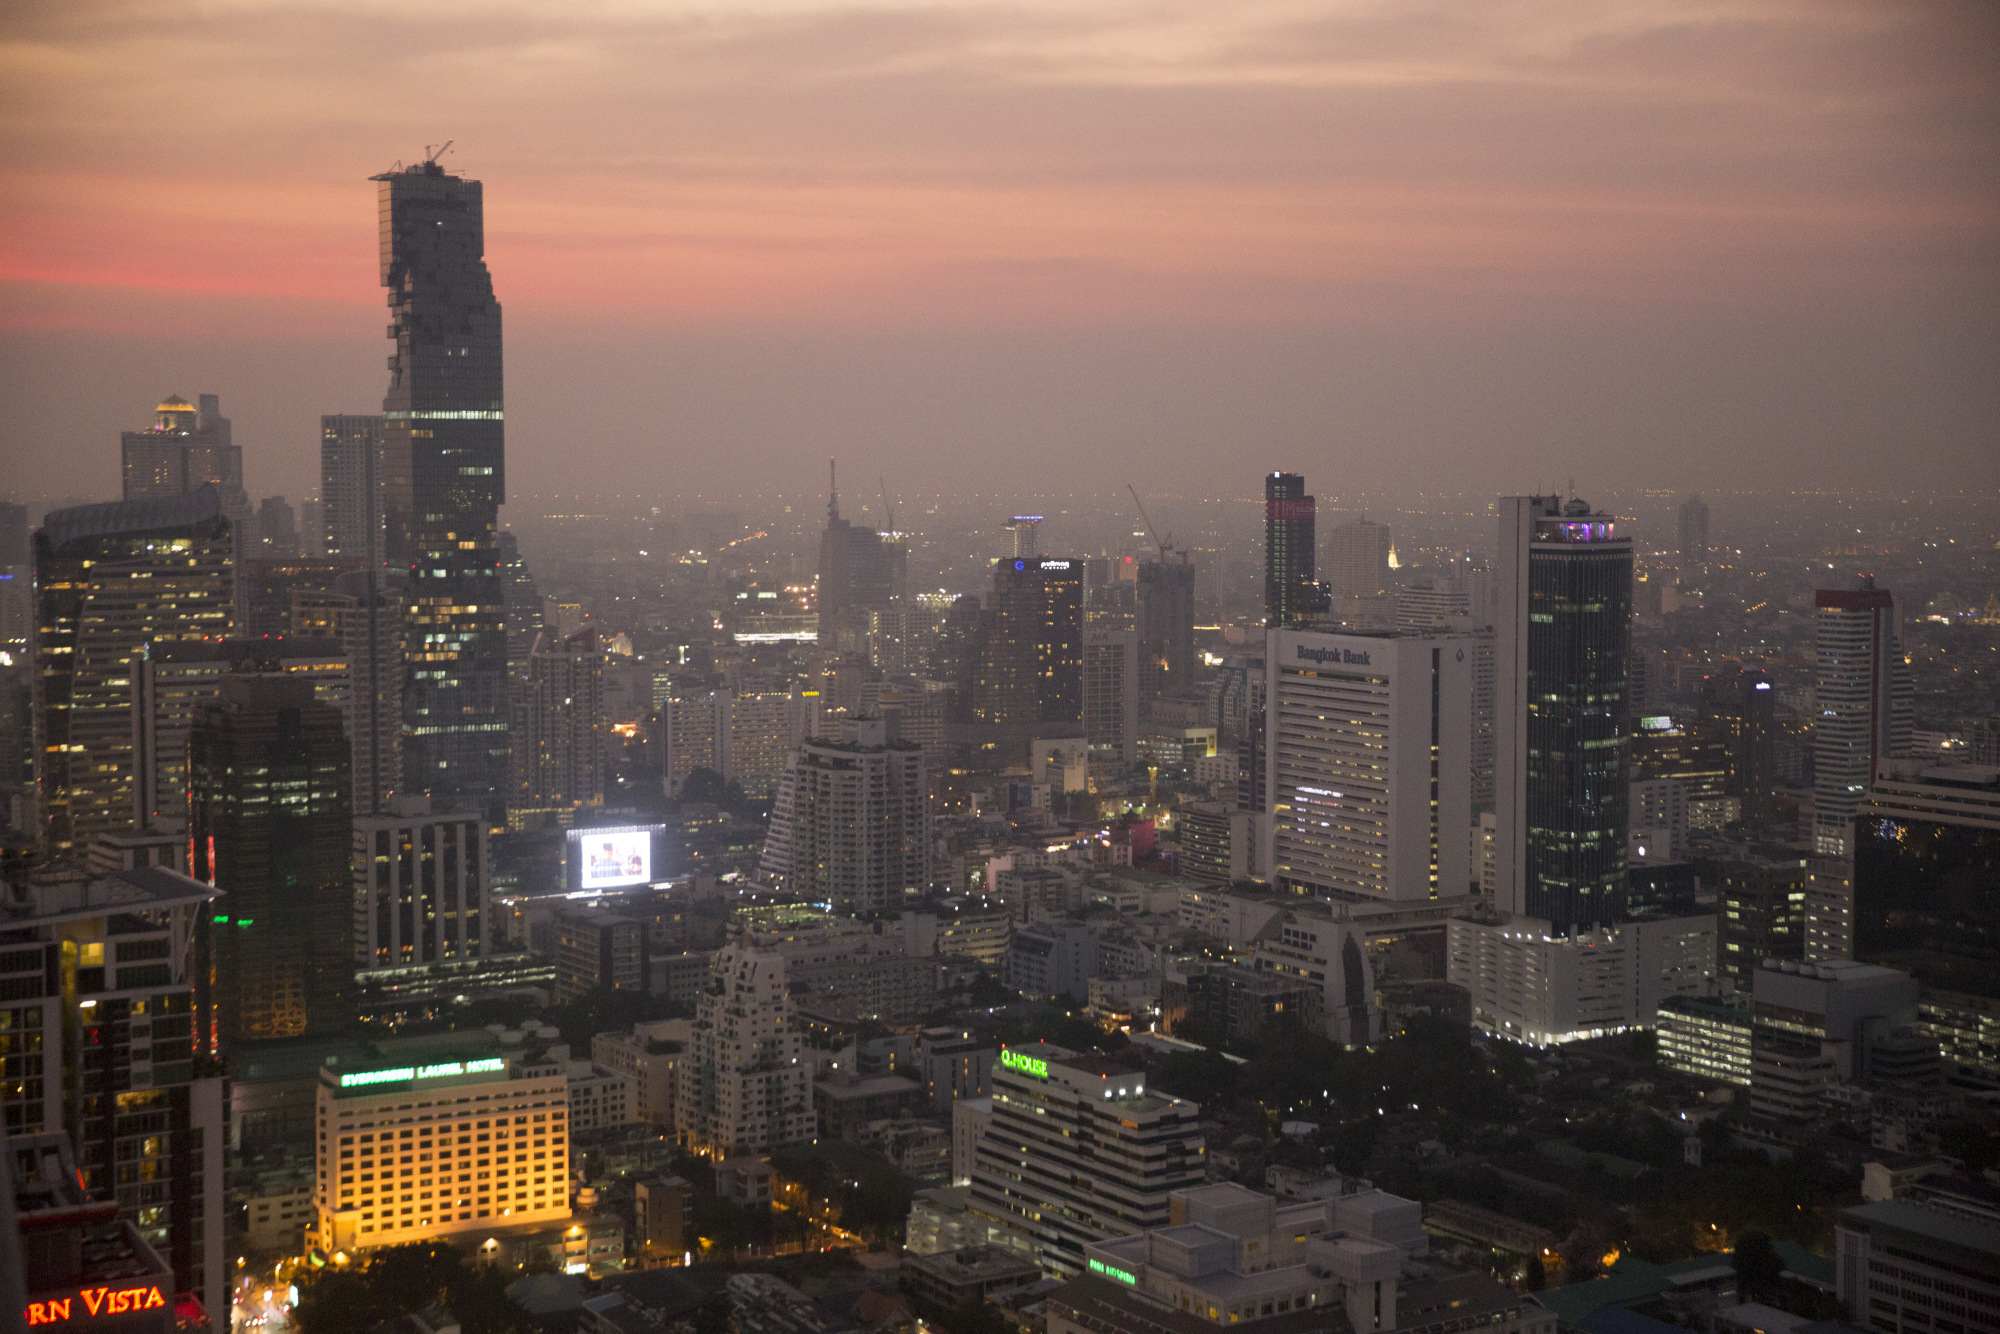 Buildings stand illuminated at dusk in the Sathorn district of Bangkok, Thailand, on Monday, Jan. 30, 2017. Thailand's central bank held its key interest rate near a record low to shield the nation's economic recovery as the threat of trade protectionism mounts. Photographer: Brent Lewin/Bloomberg